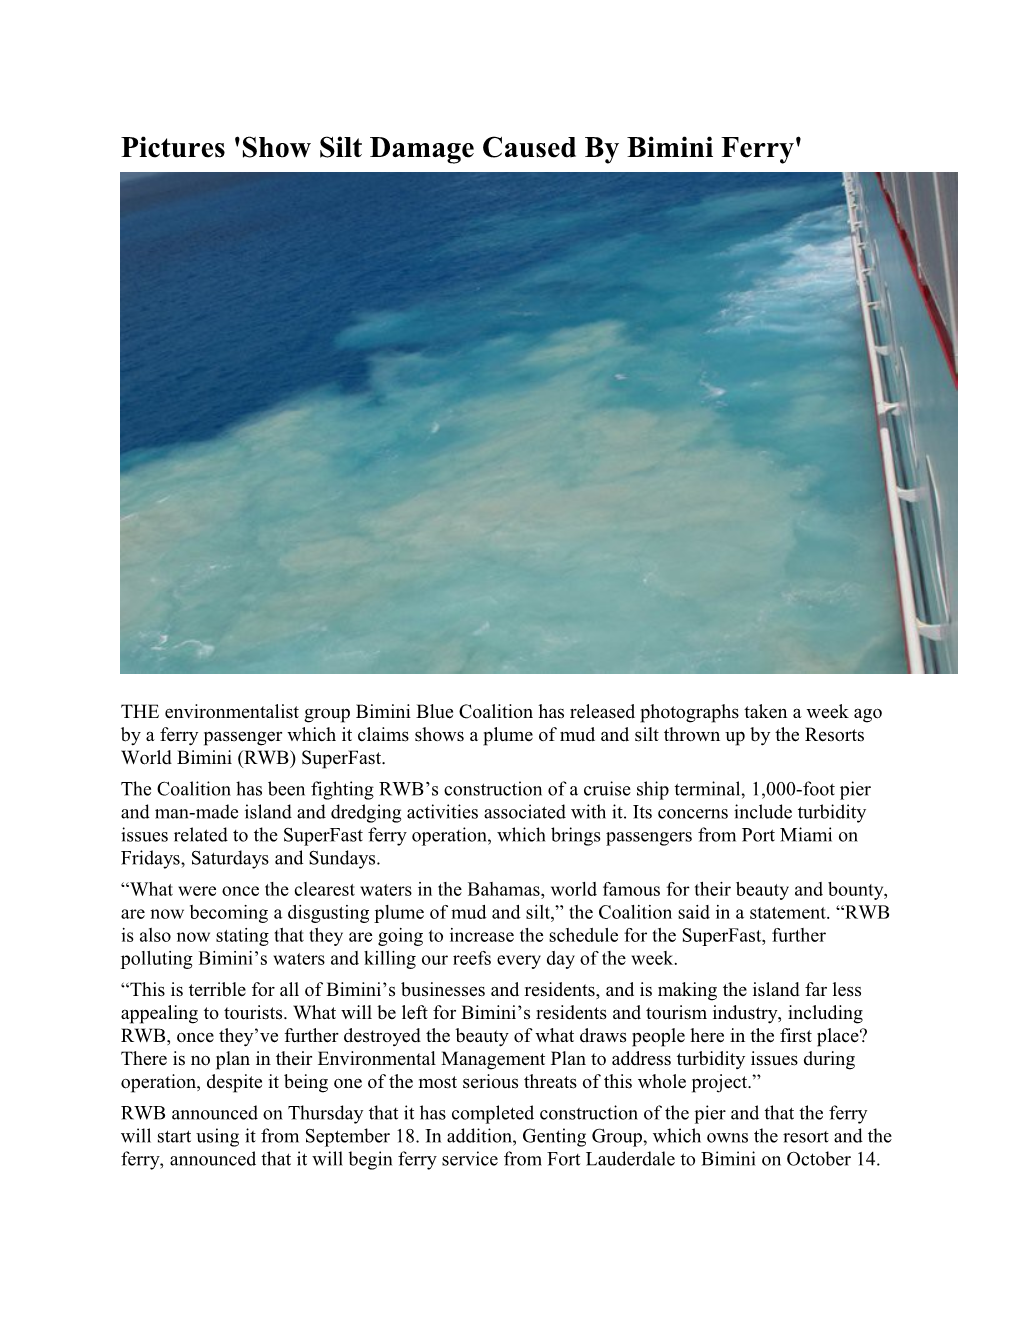 Pictures 'Show Silt Damage Caused by Bimini Ferry'